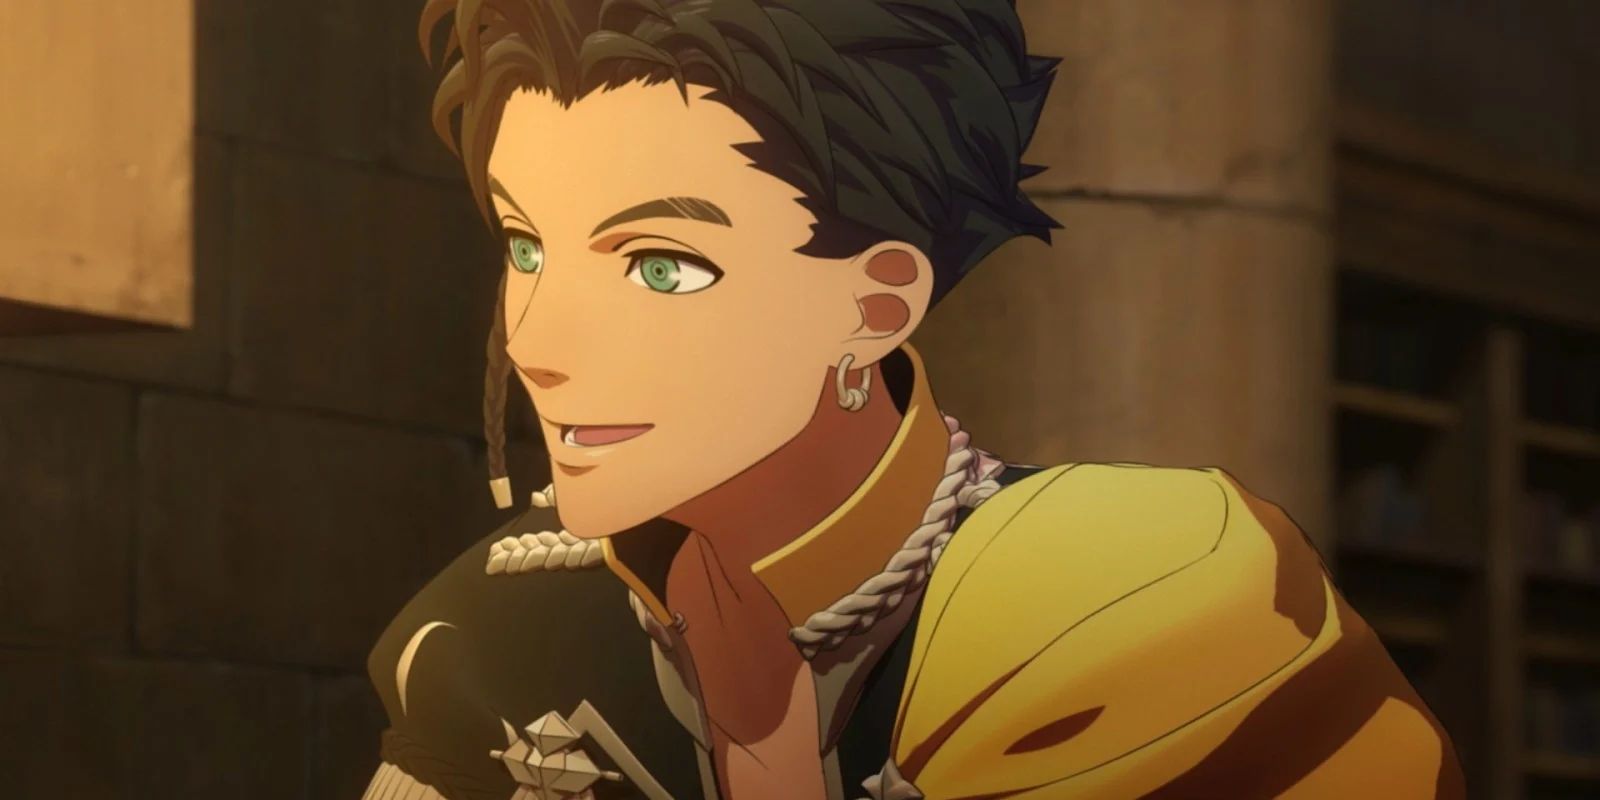 Claude smiles in a screenshot from Fire Emblem: Three Houses